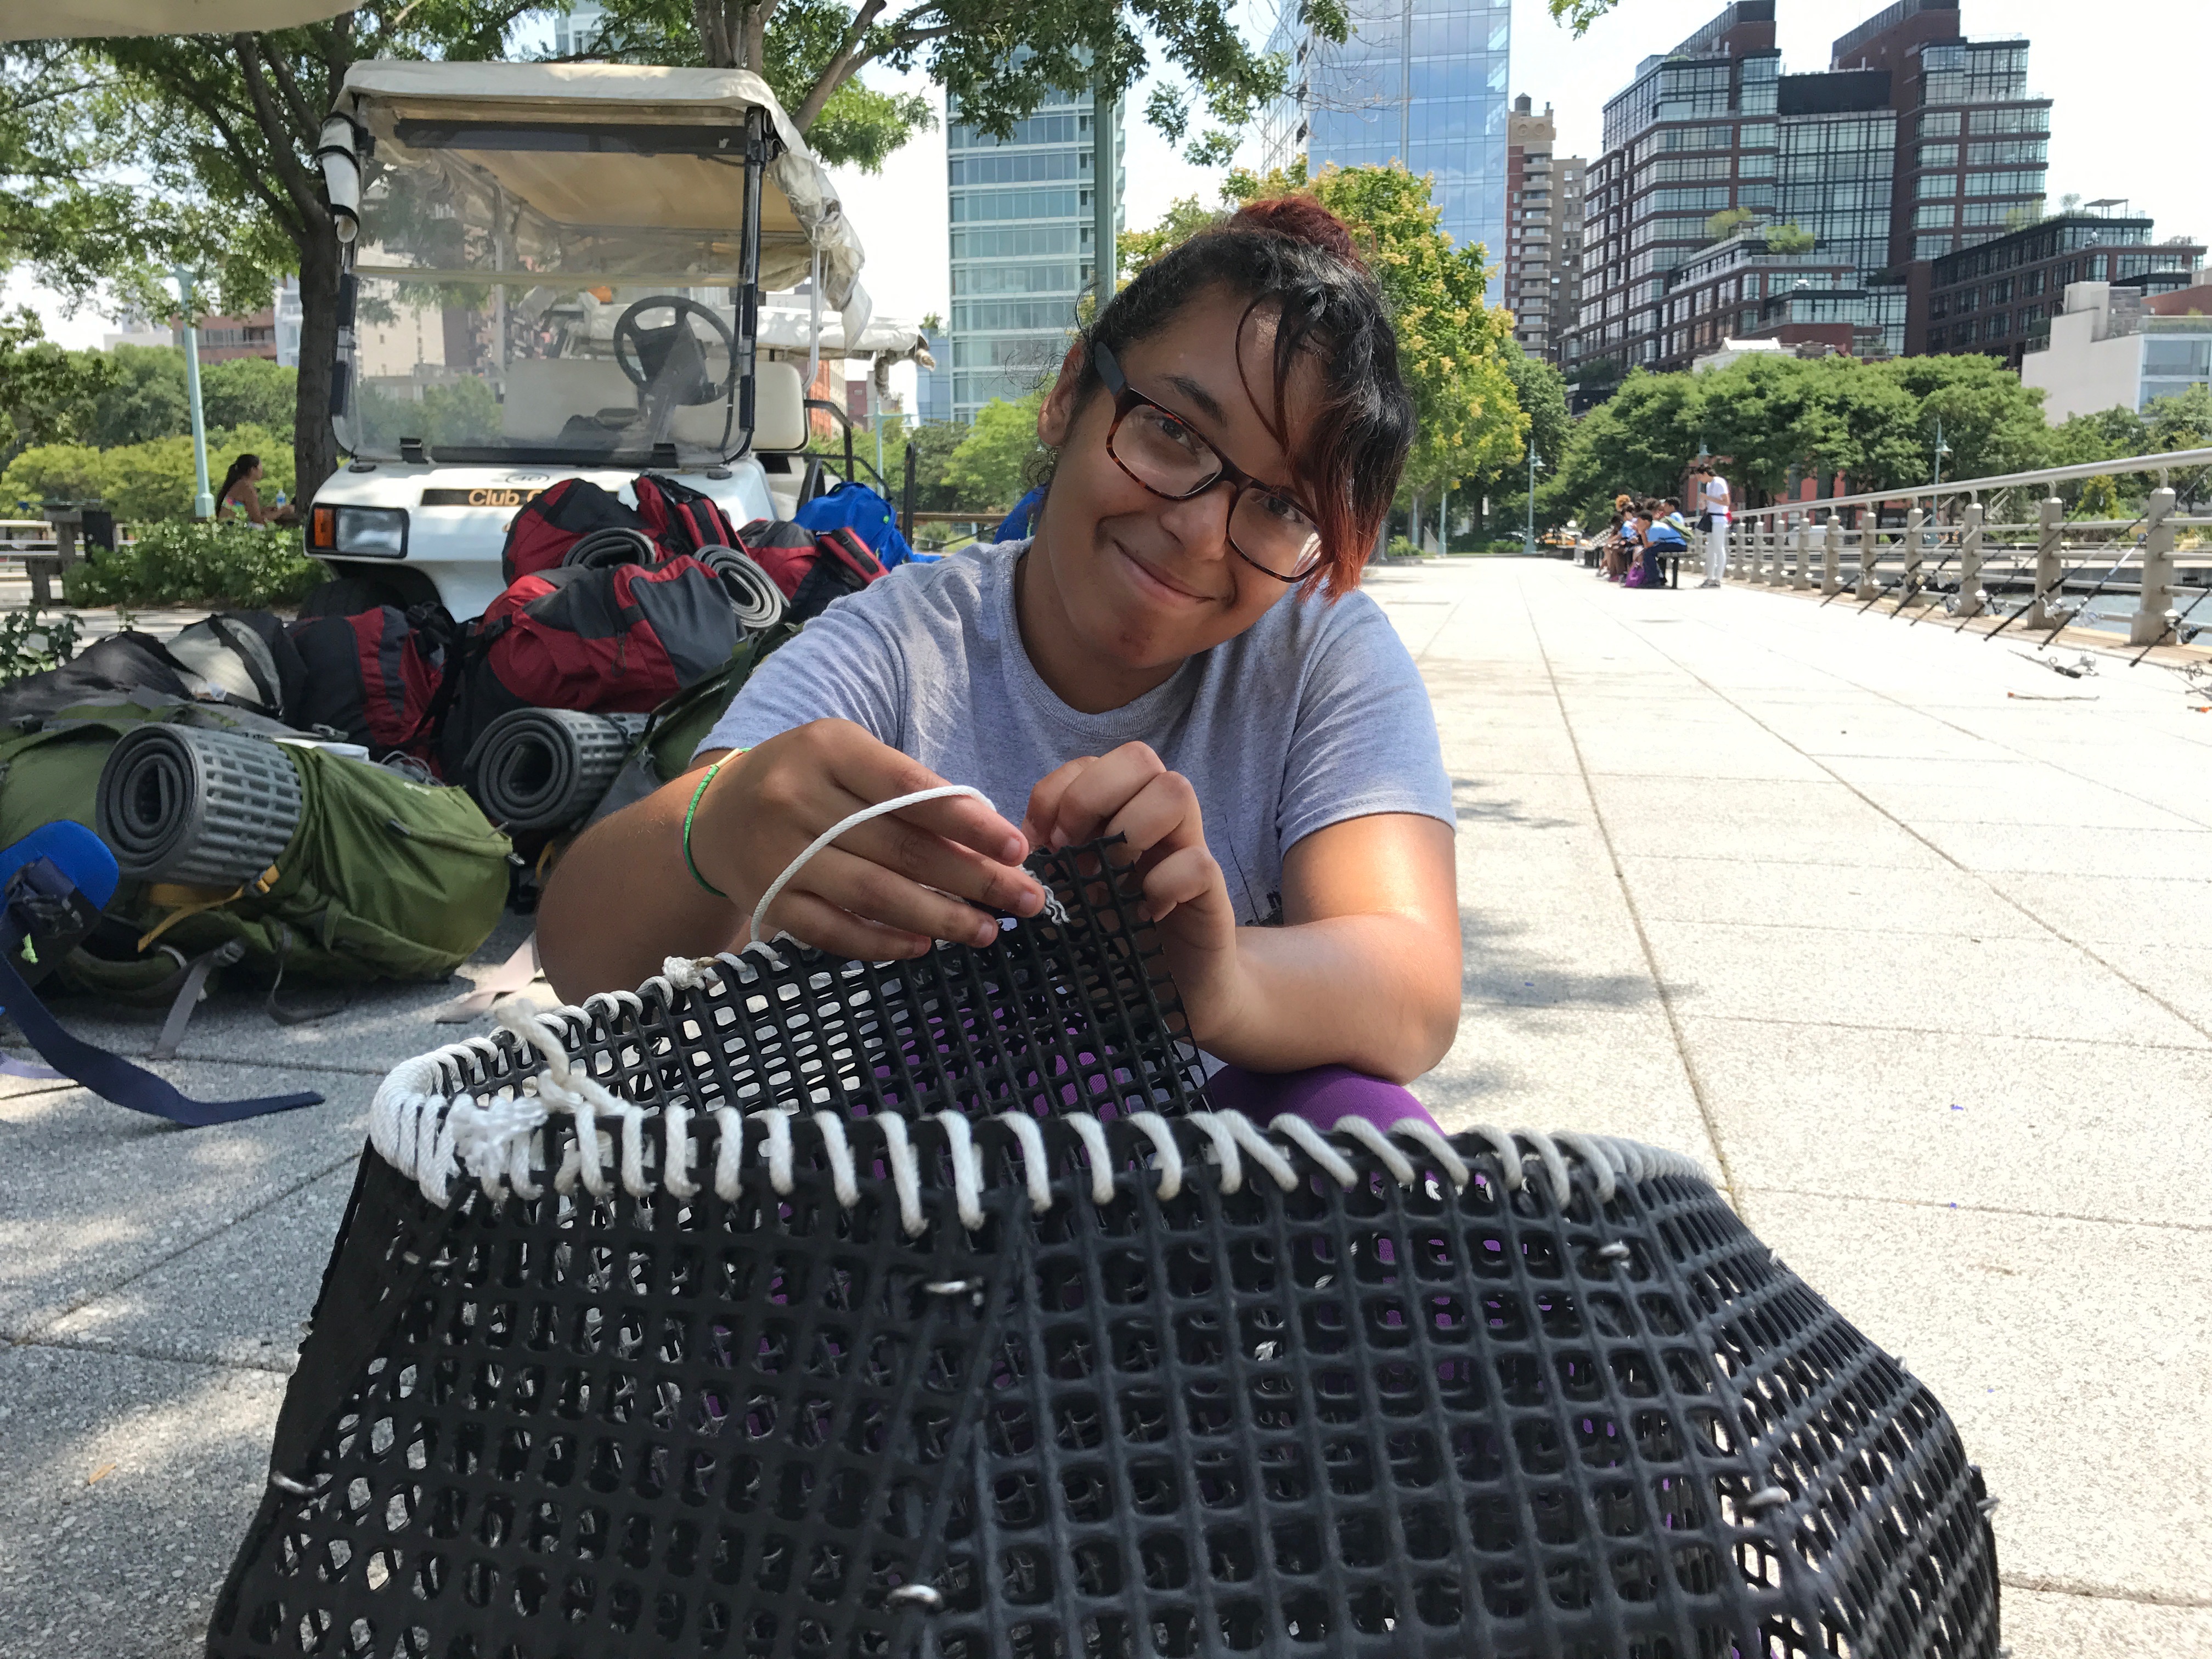 NYC ICO participant helps Hudson River Park staff put together a net as part of their oyster conservation project.